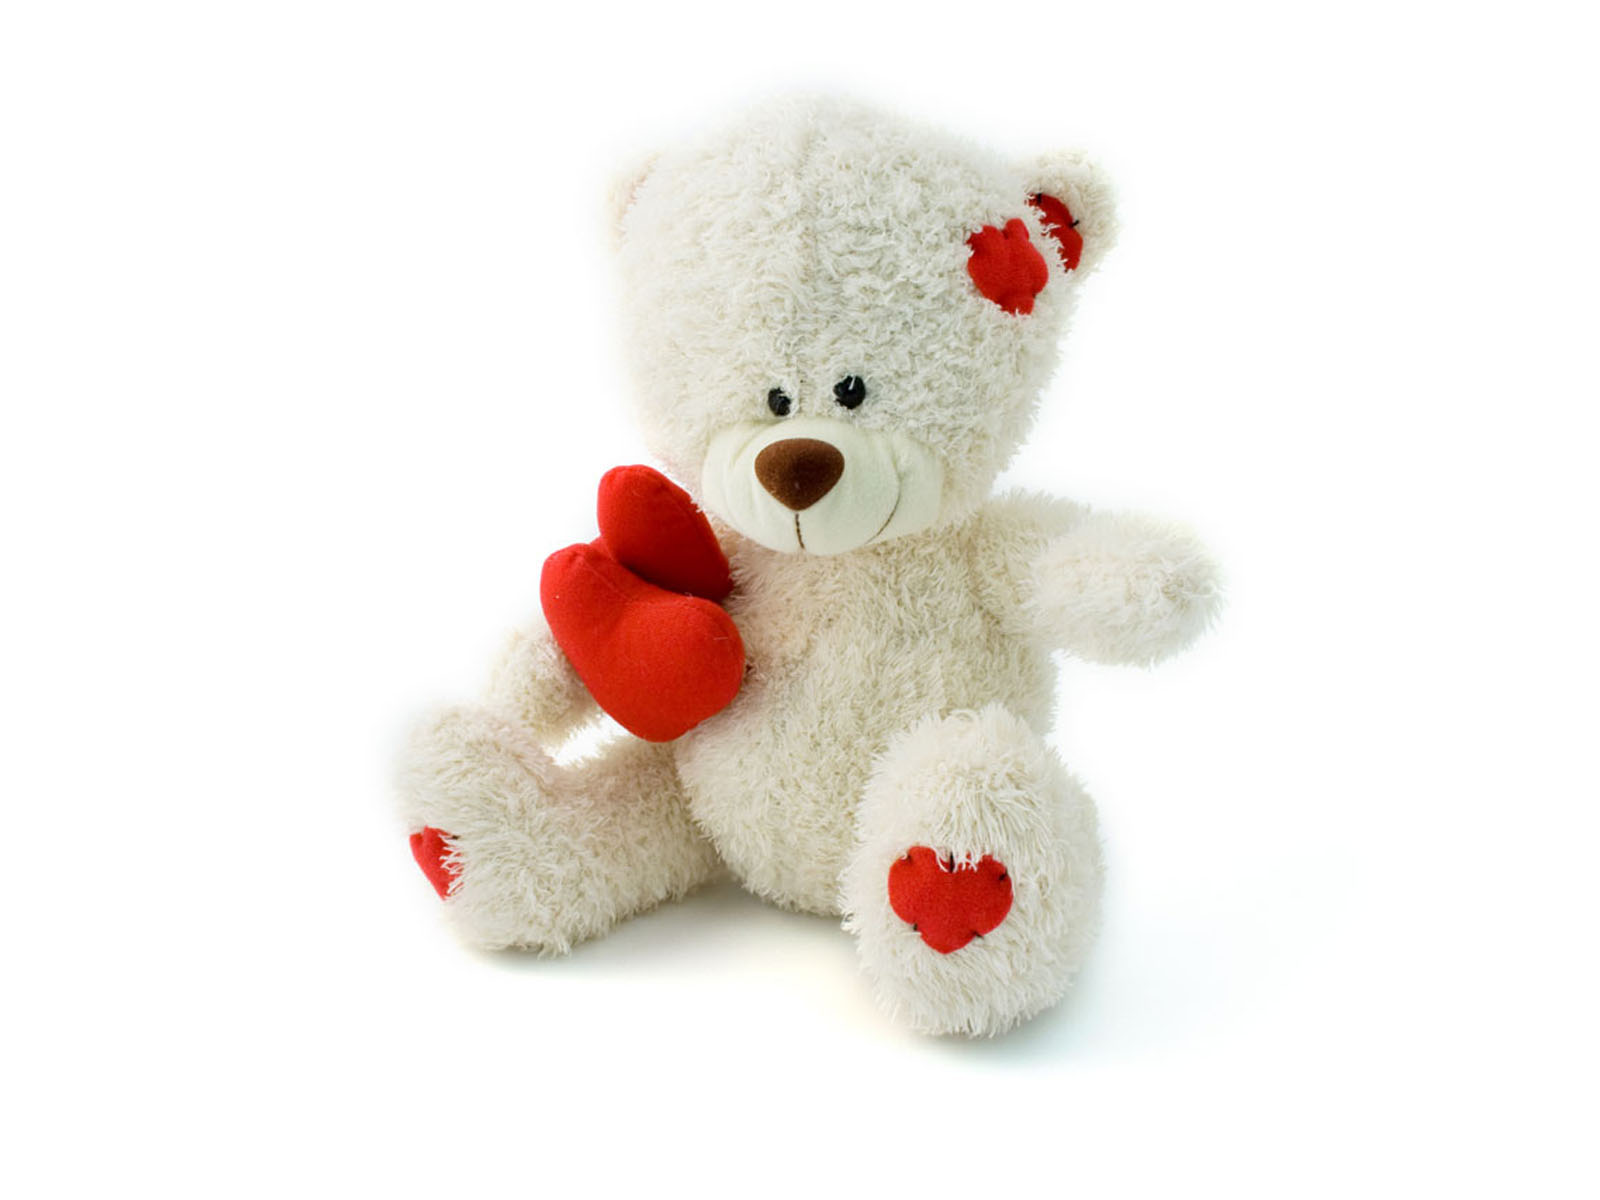 Tag Love Teddy Bear Wallpaper Image Photos And Pictures For